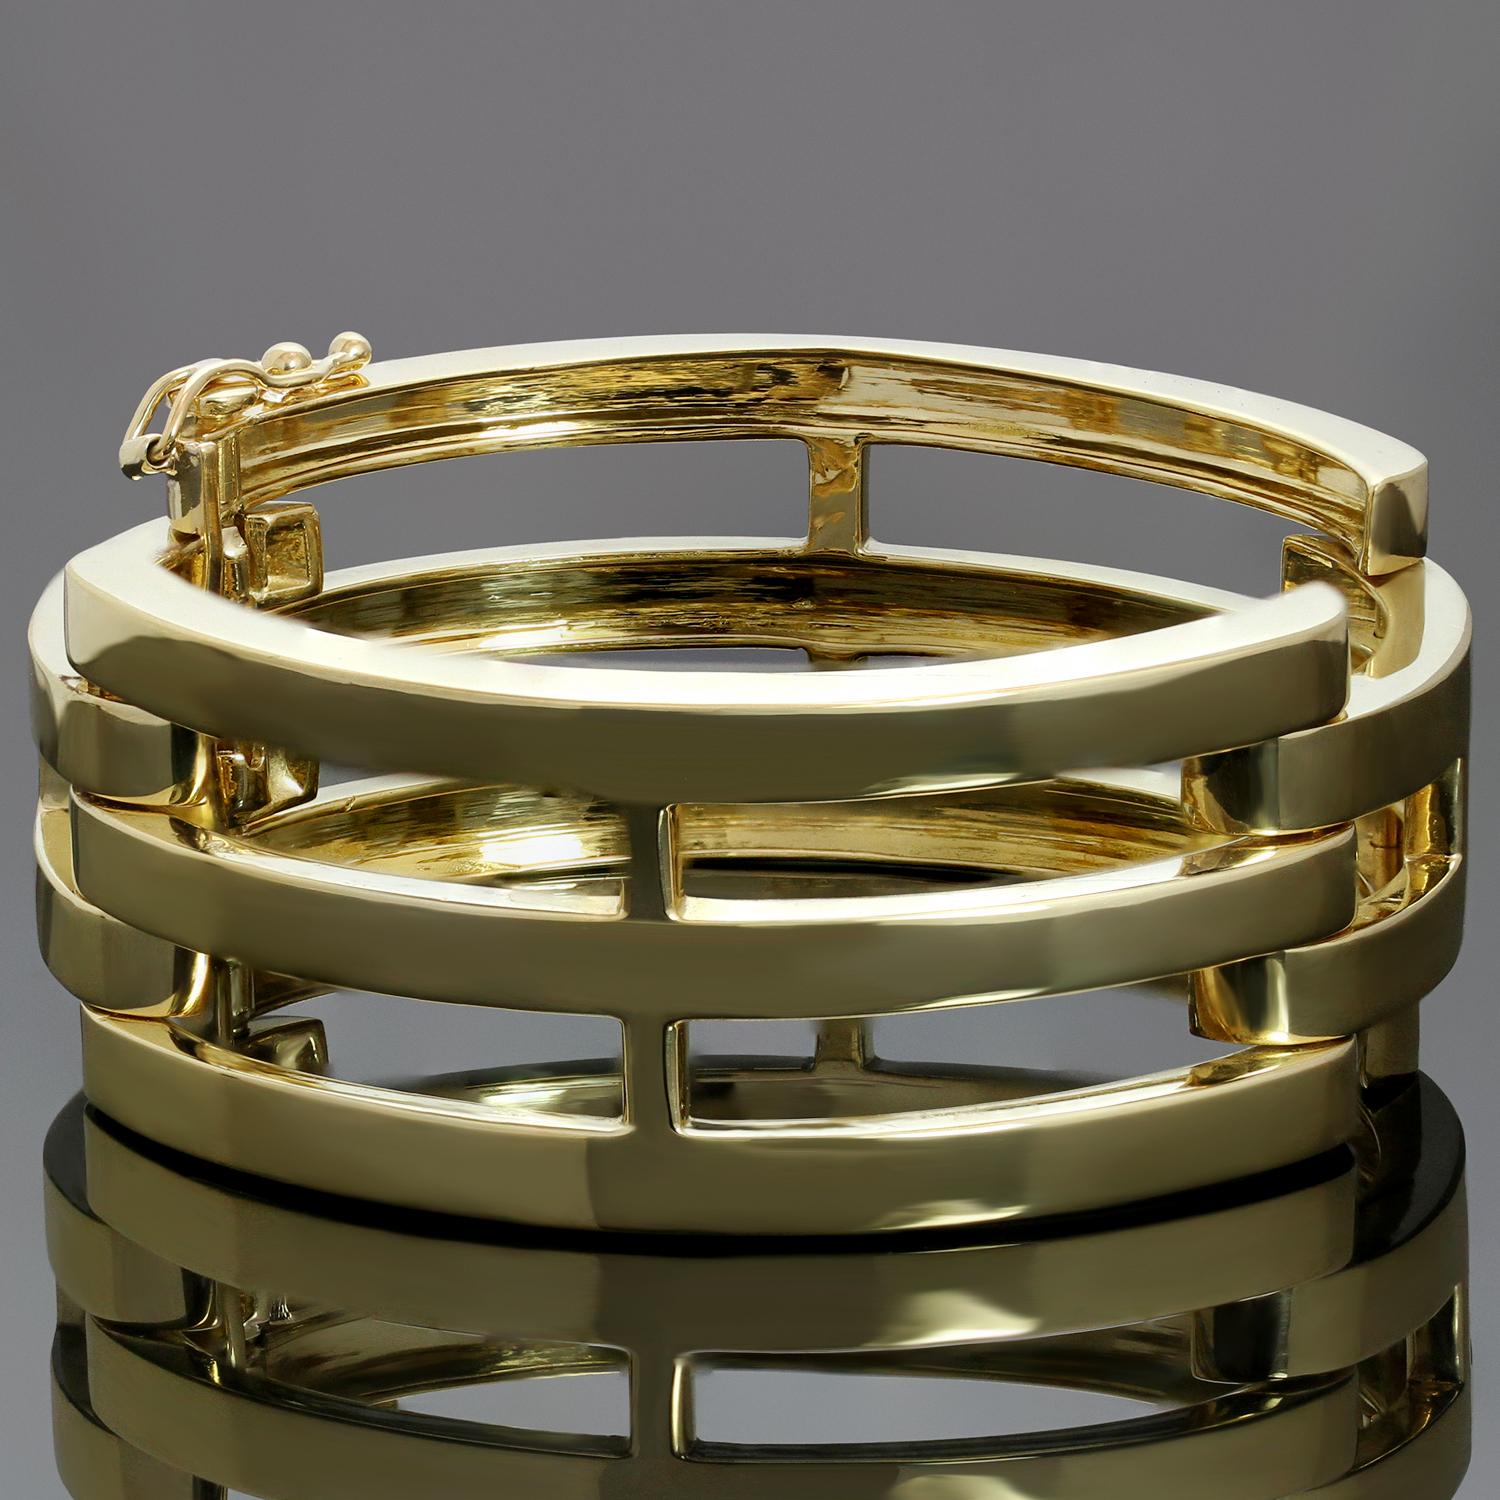 This elegant Tiffany & Co. bangle bracelet features a linked design crafted in 18k yellow gold. Made in United States circa 1990s. Measurements: 0.94